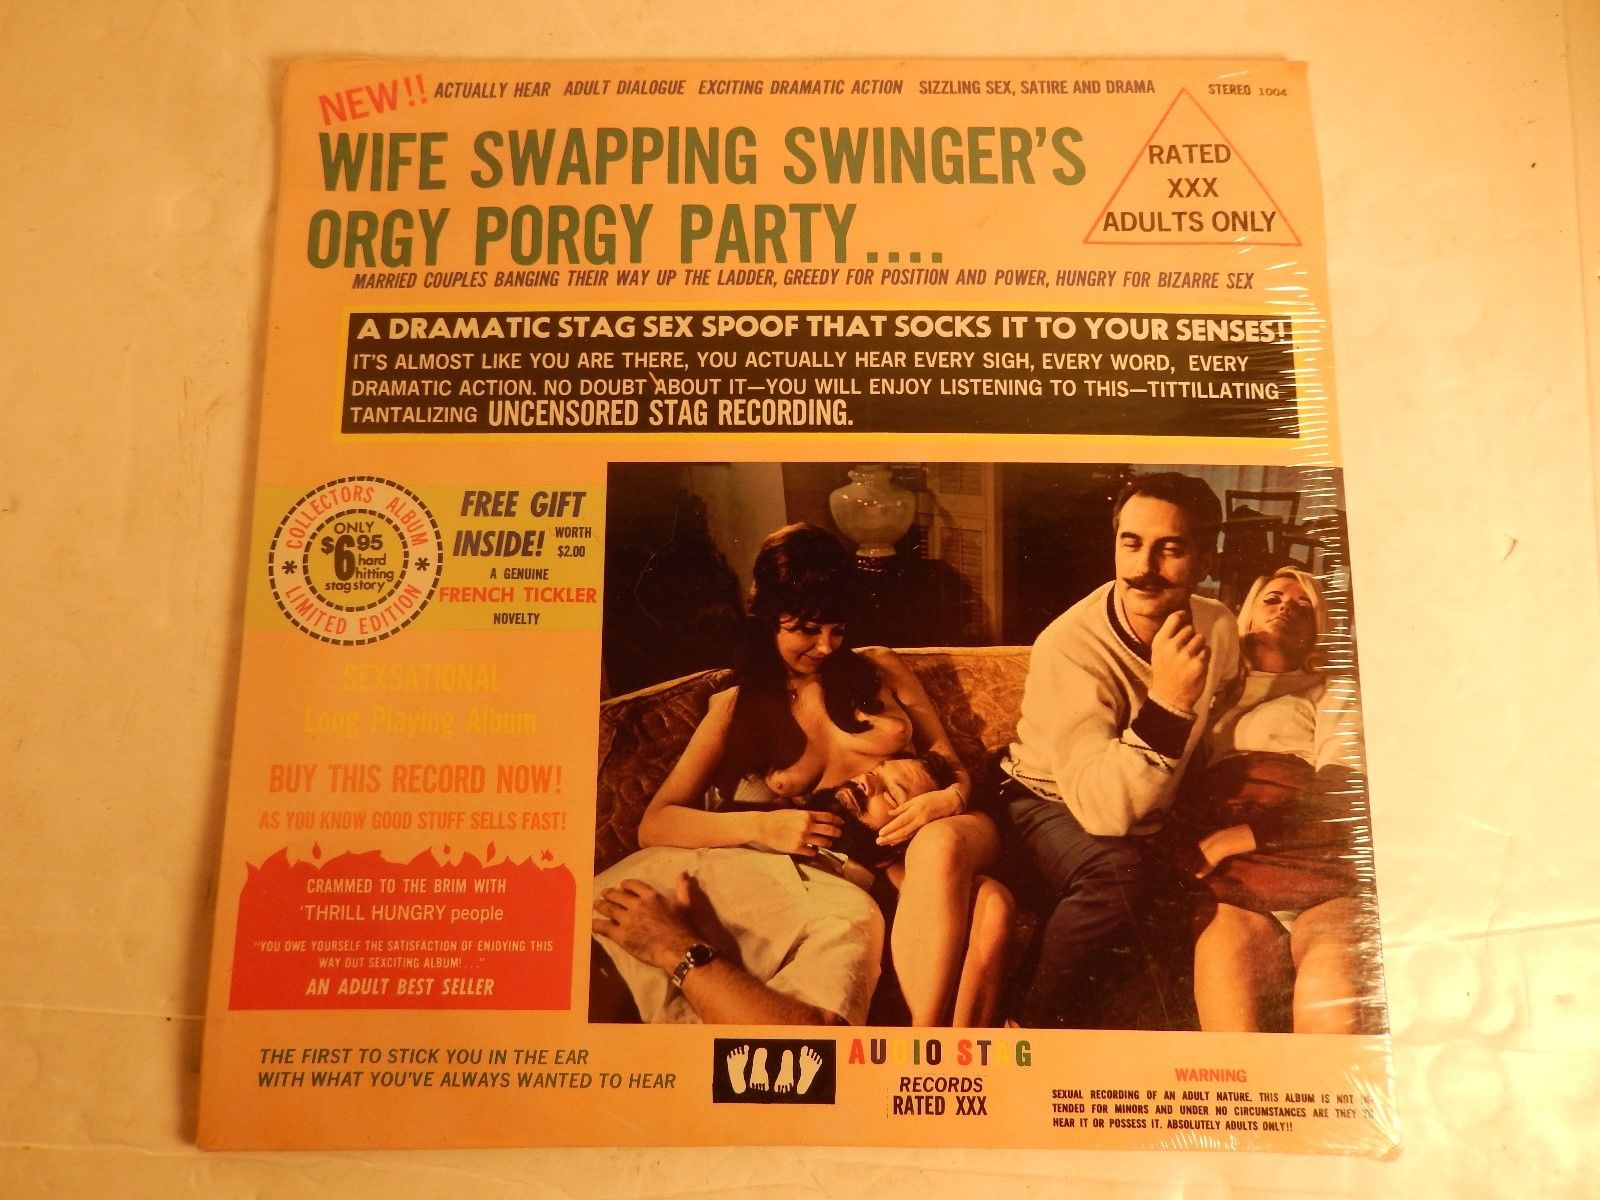 popsike - Vintage Sealed LP Audio Stag Records Adult XXX Wife Swapping Swingers Orgy Porgy photo